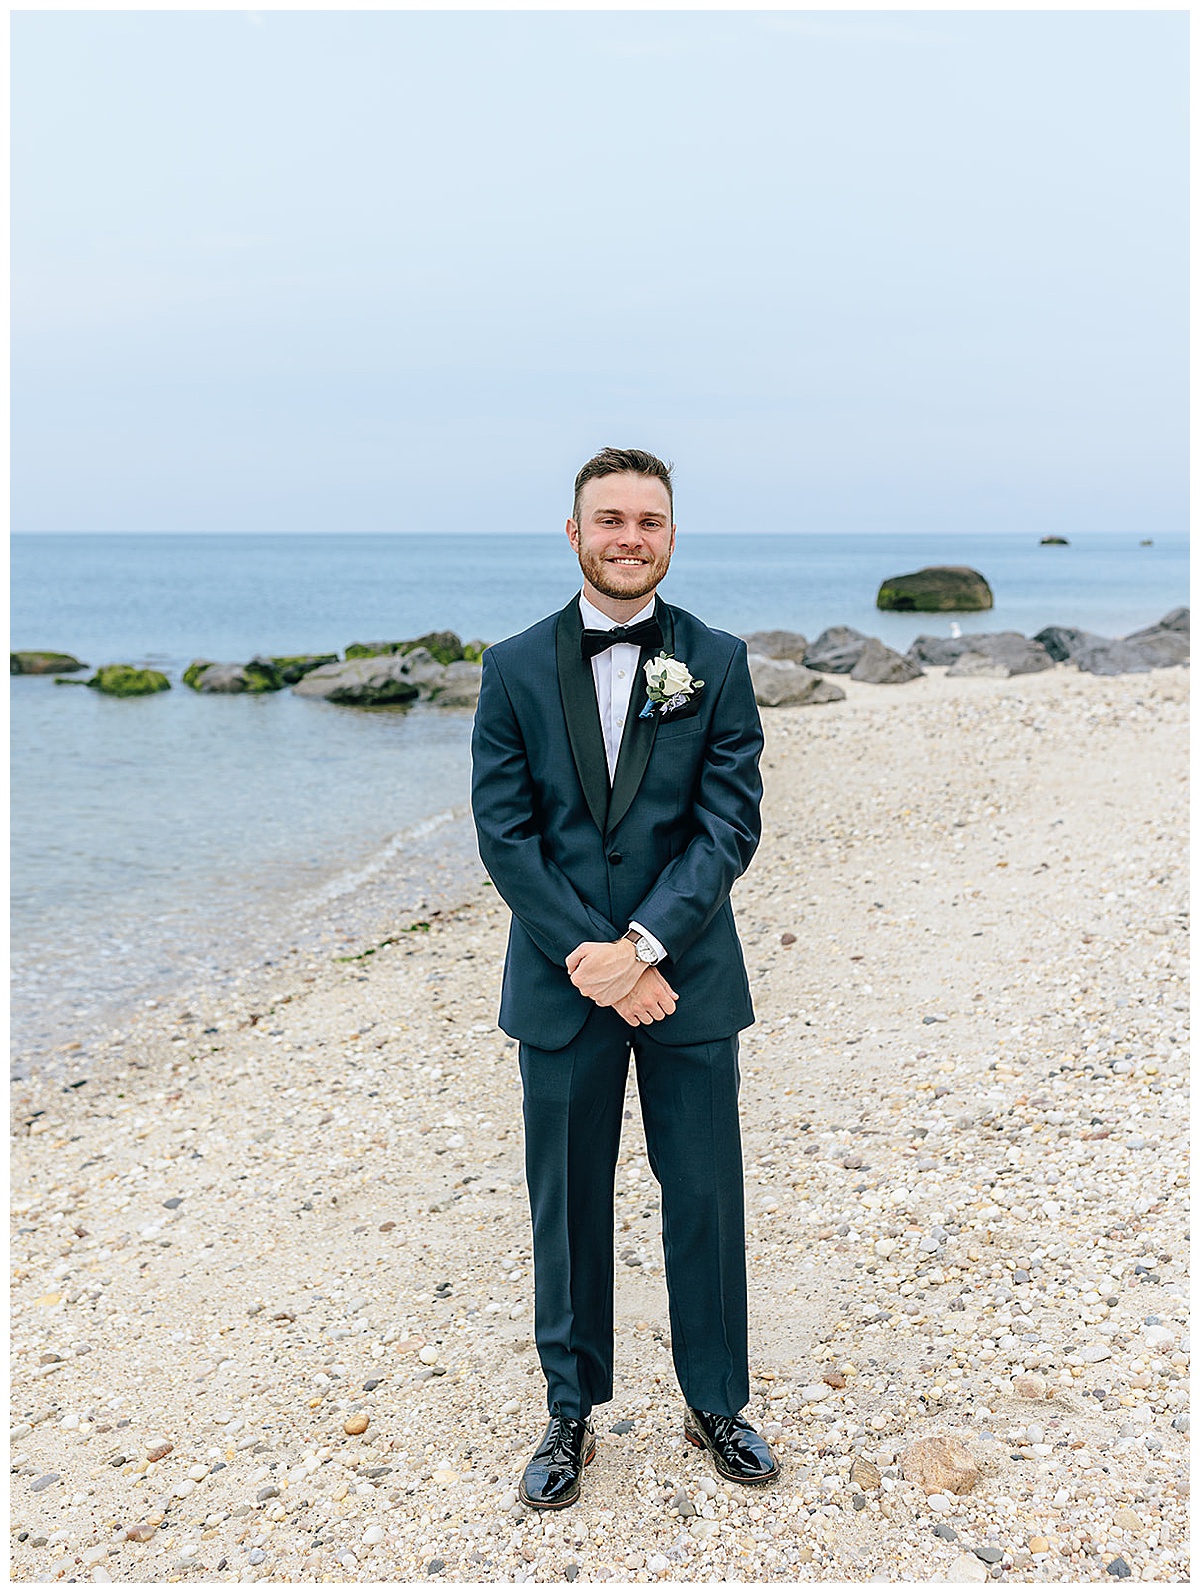 Groom stands tall at Giorgio's Baiting Hollow